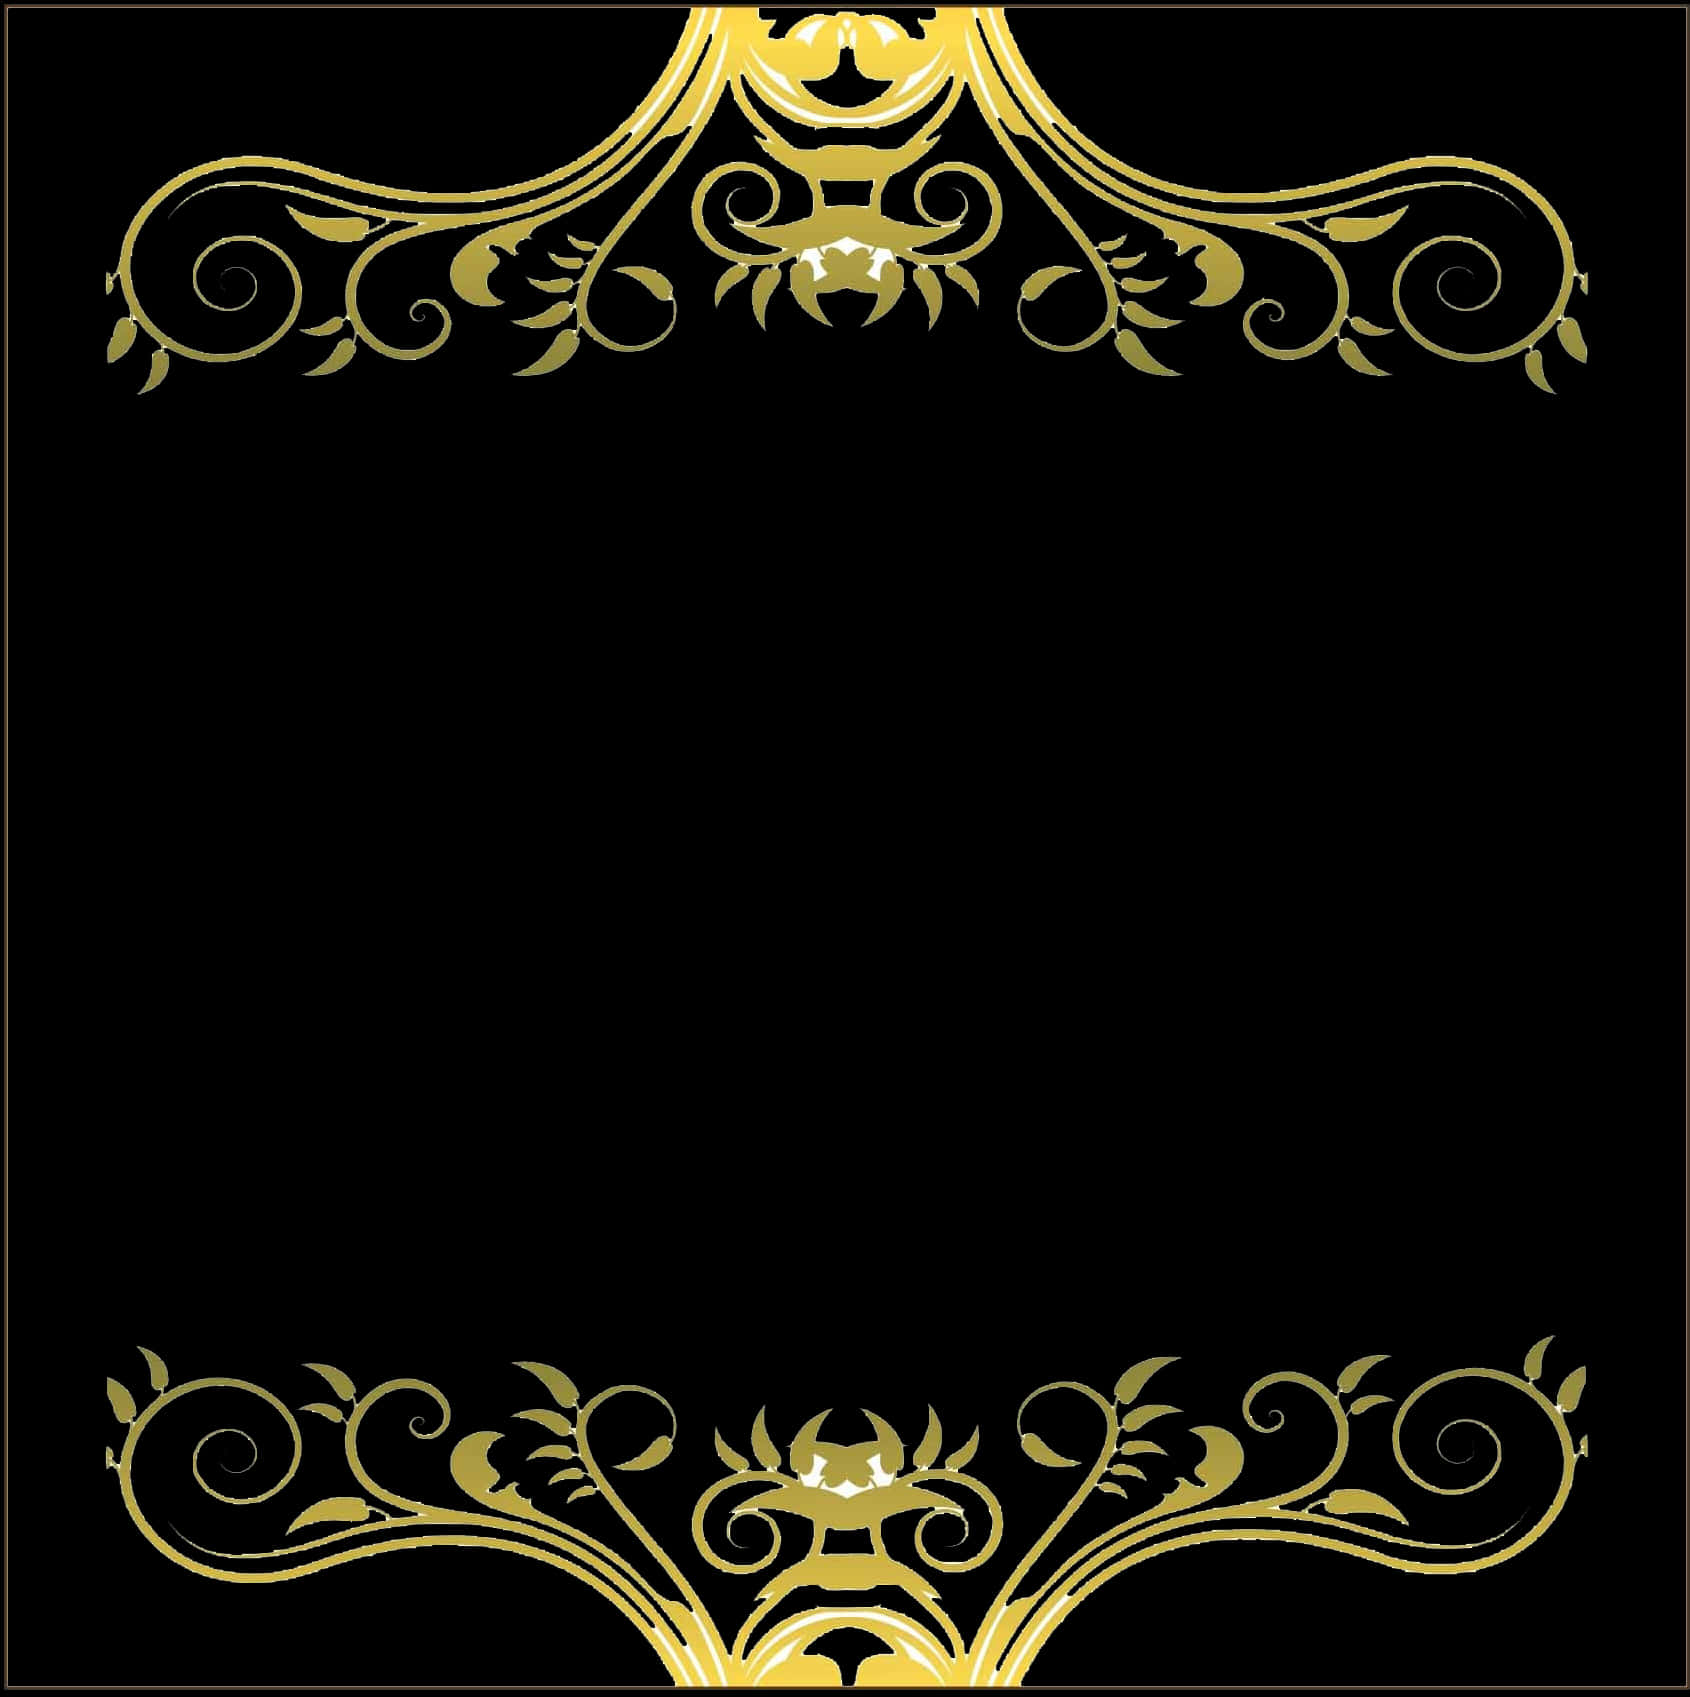 A Black And Gold Frame With Swirls